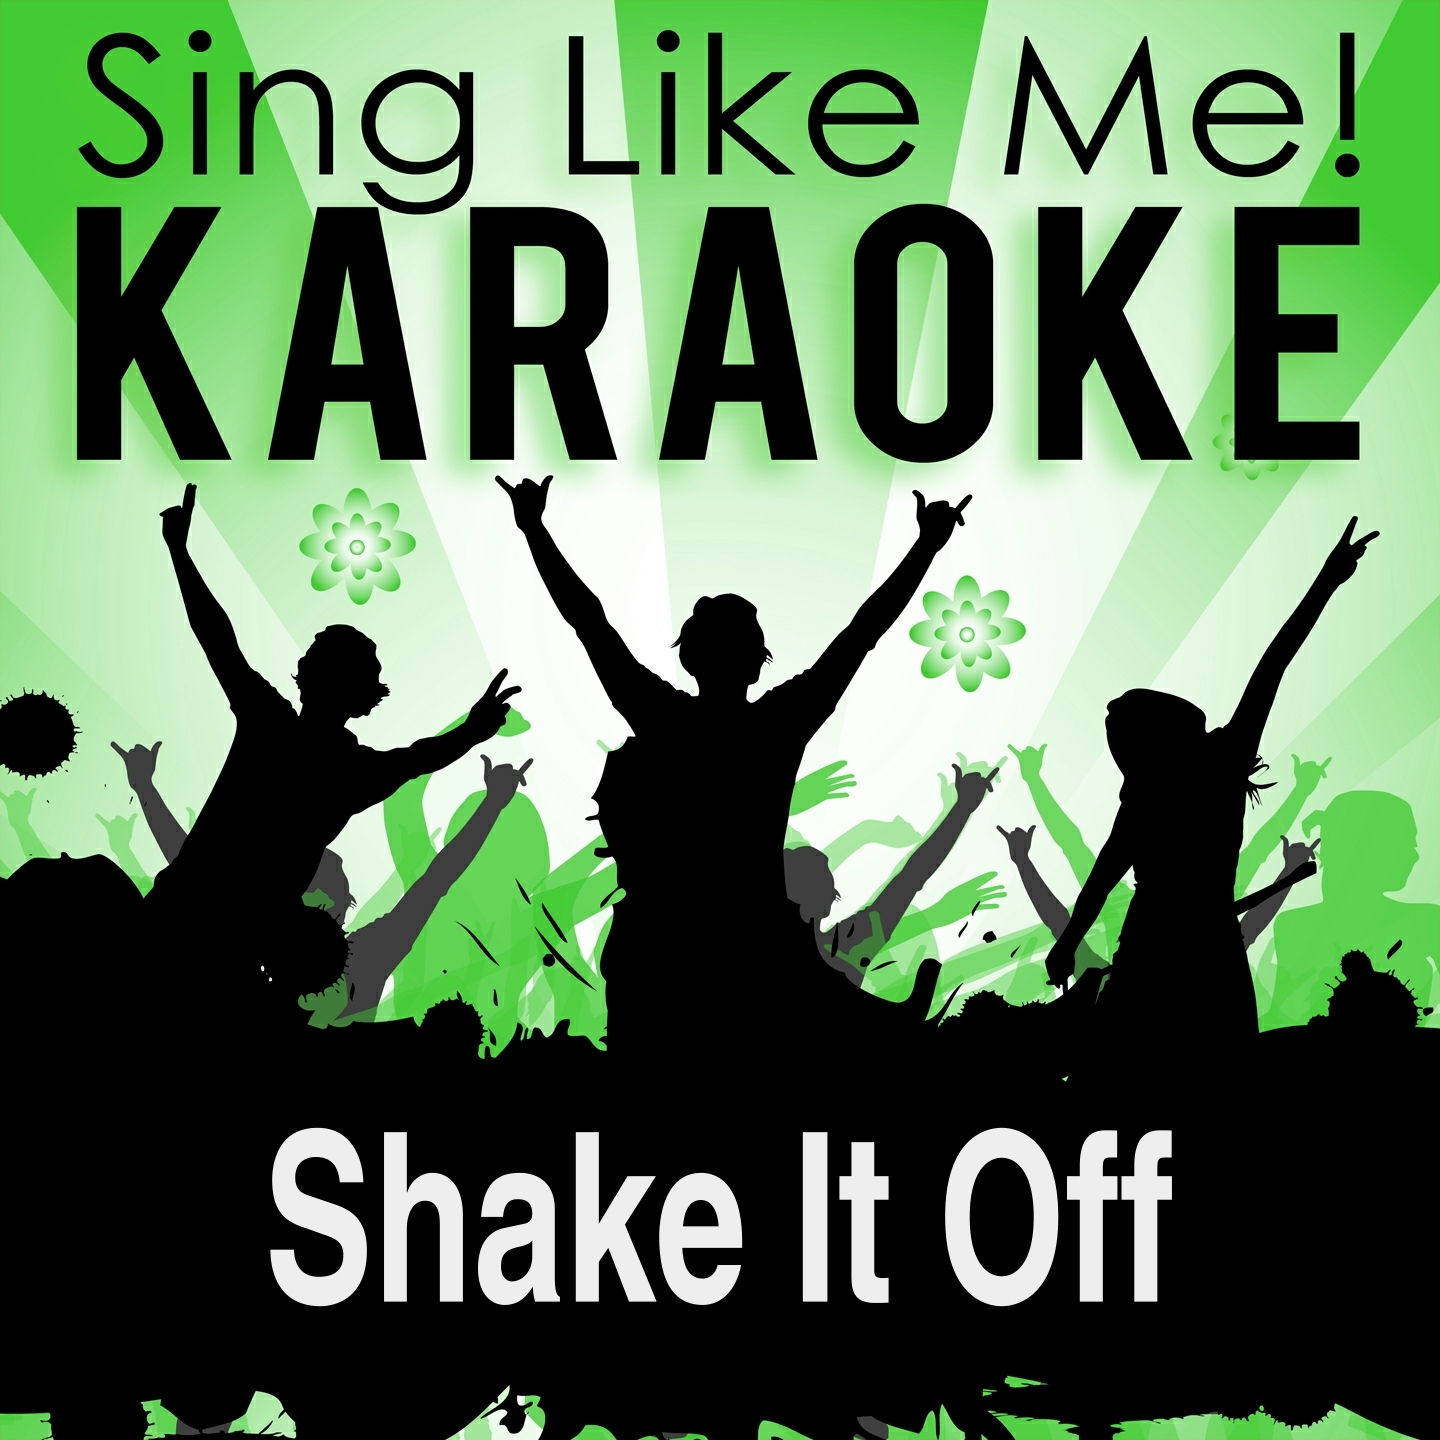 Shake It off (Karaoke Version with Guide Melody)